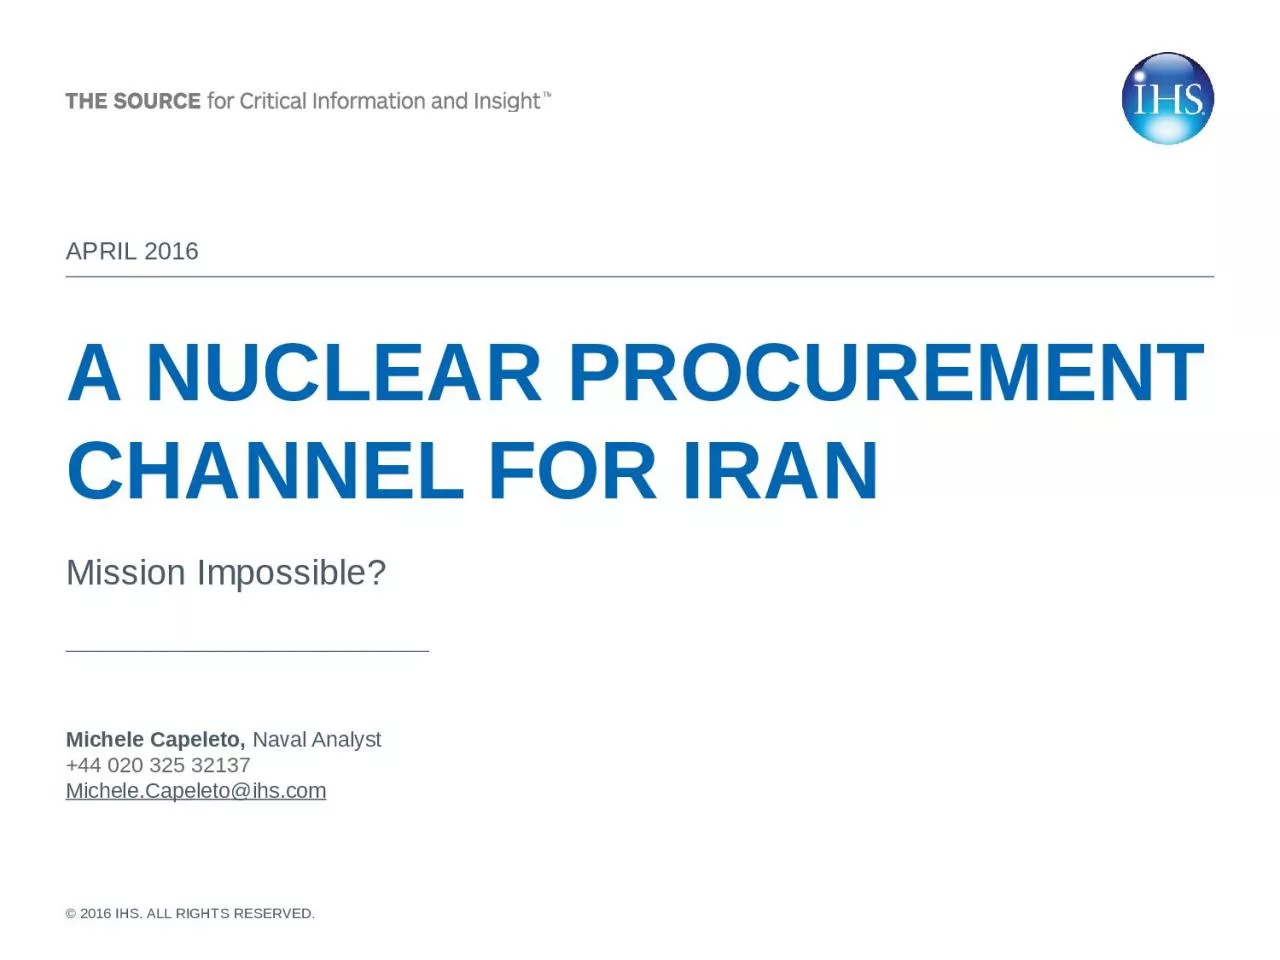 A Nuclear Procurement Channel for Iran